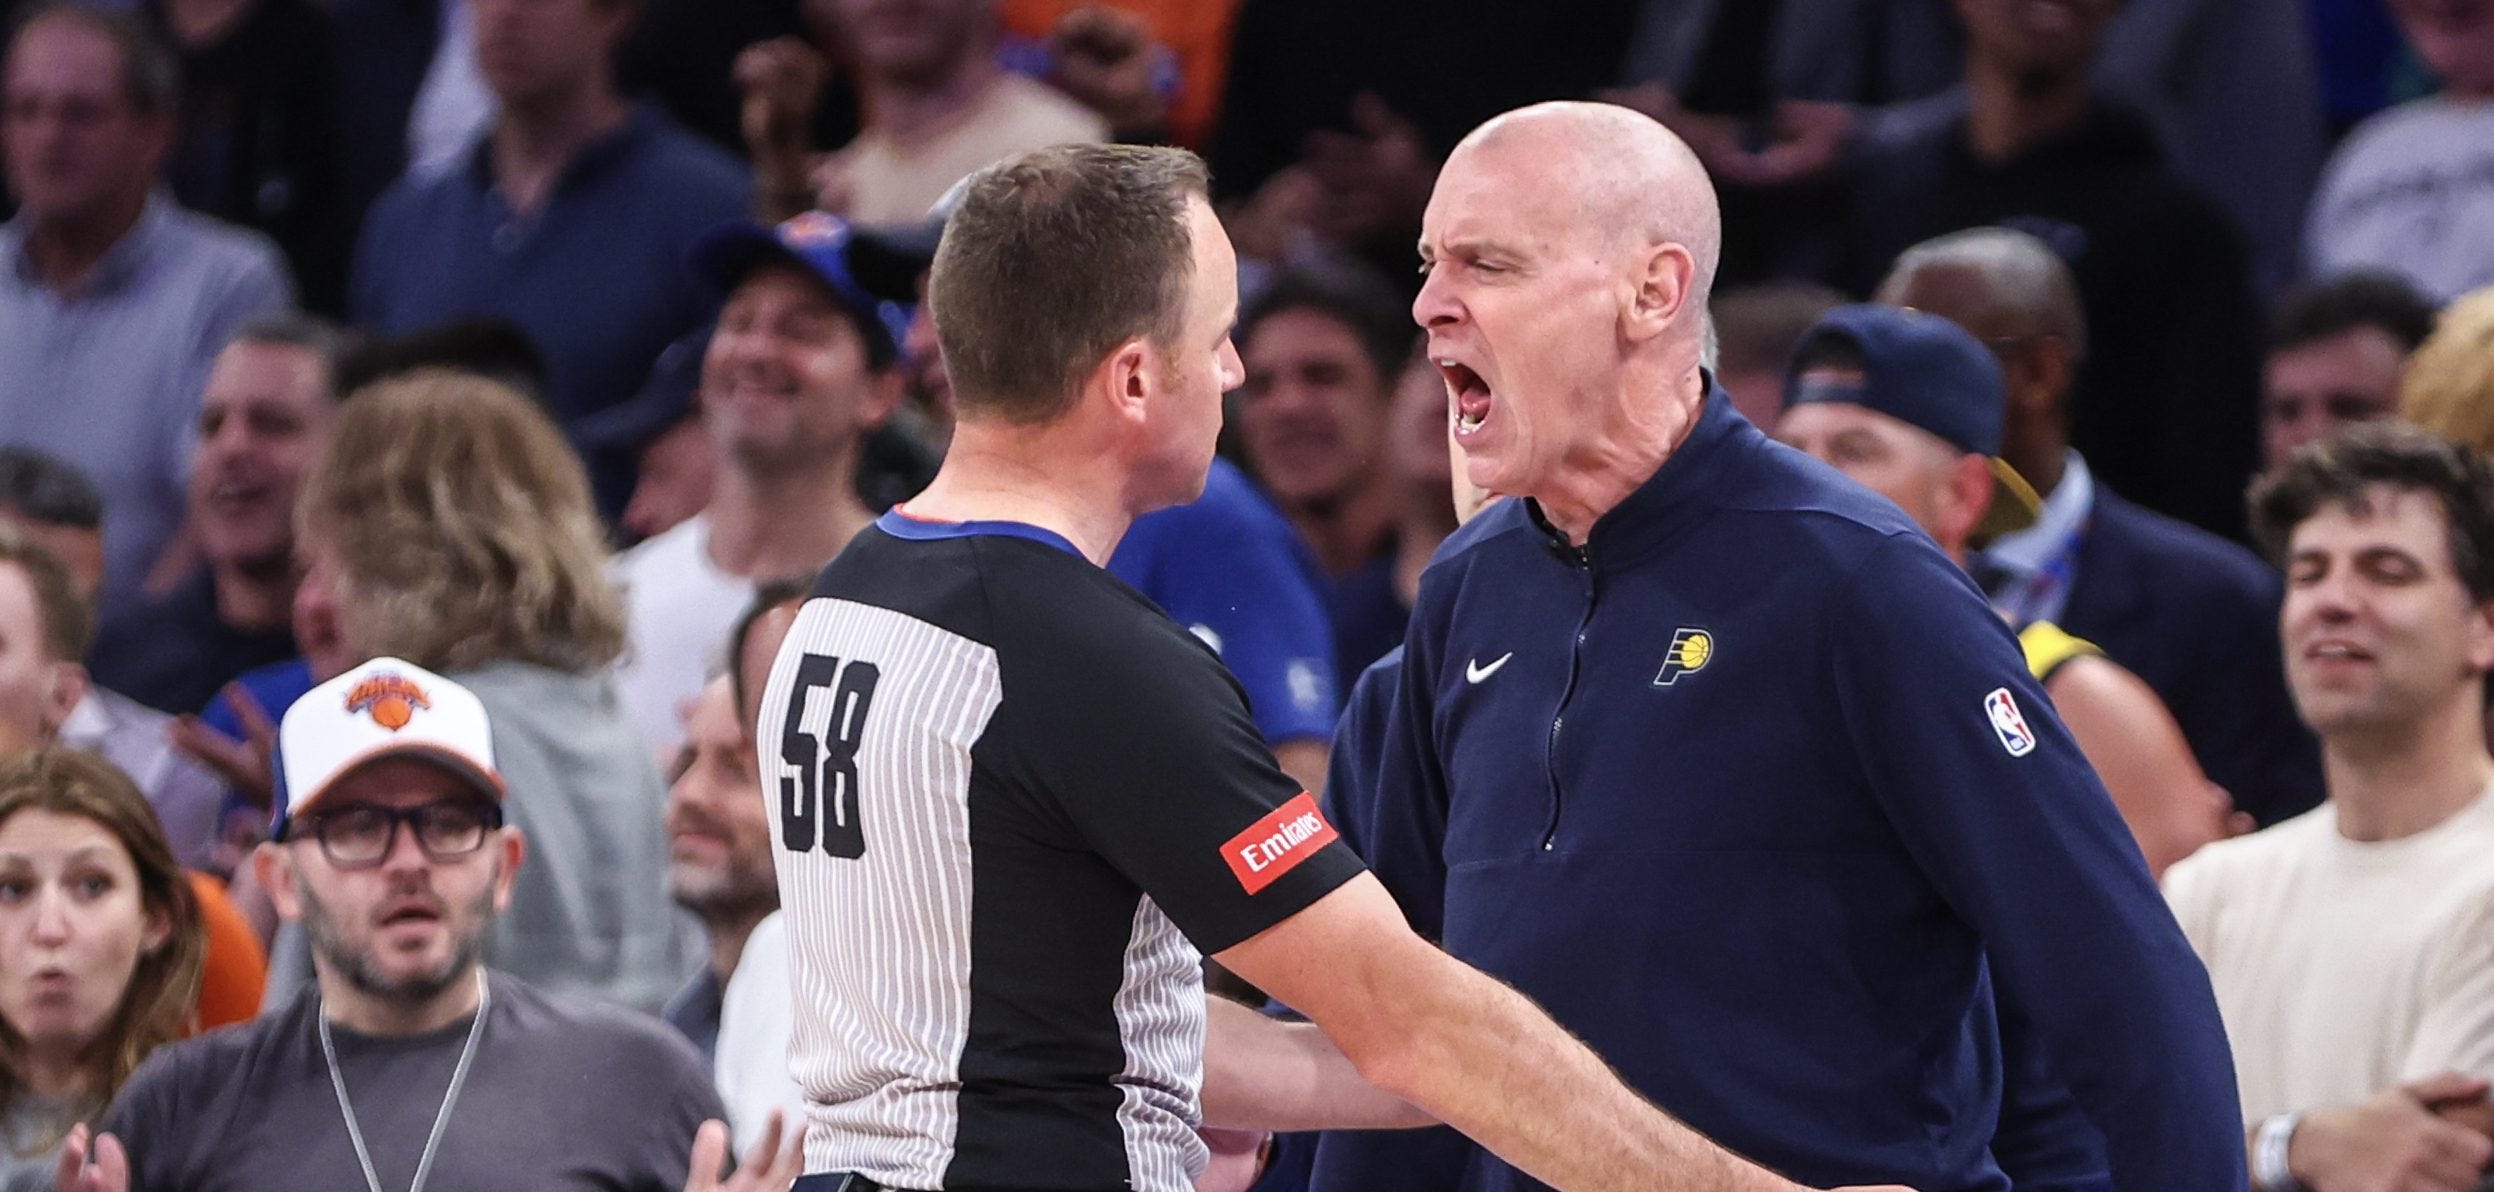 the pacers reportedly sent 78 clips of bad calls vs. knicks to the nba offices, which is laughable